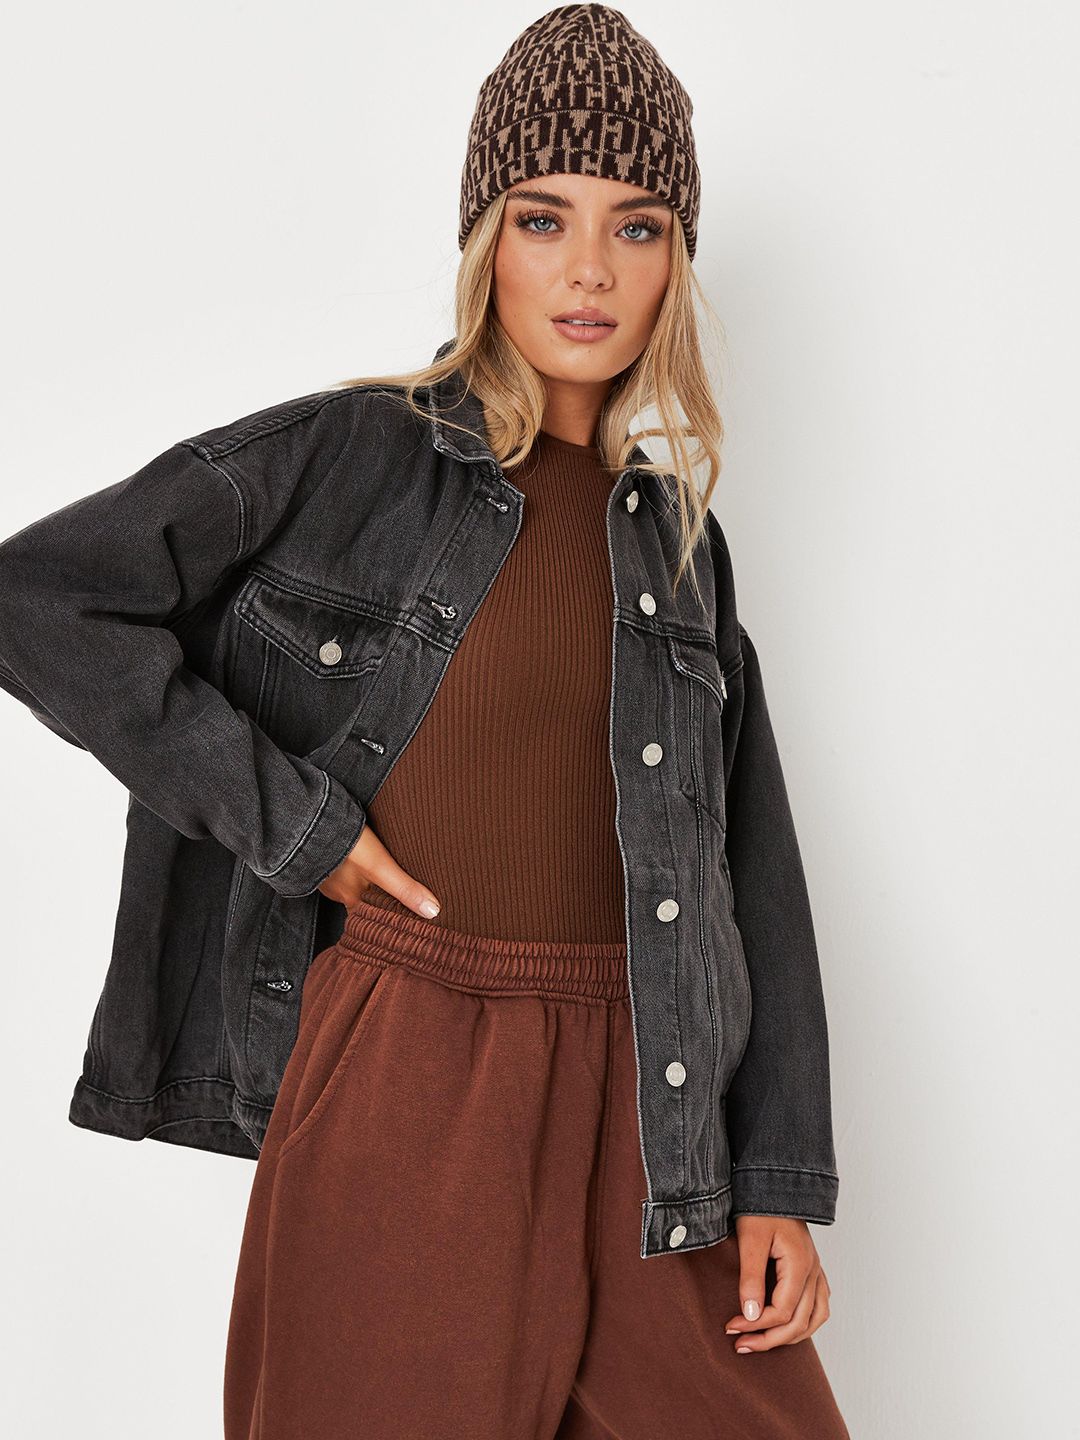 Missguided Women Charcoal Grey Solid Denim Jacket Price in India